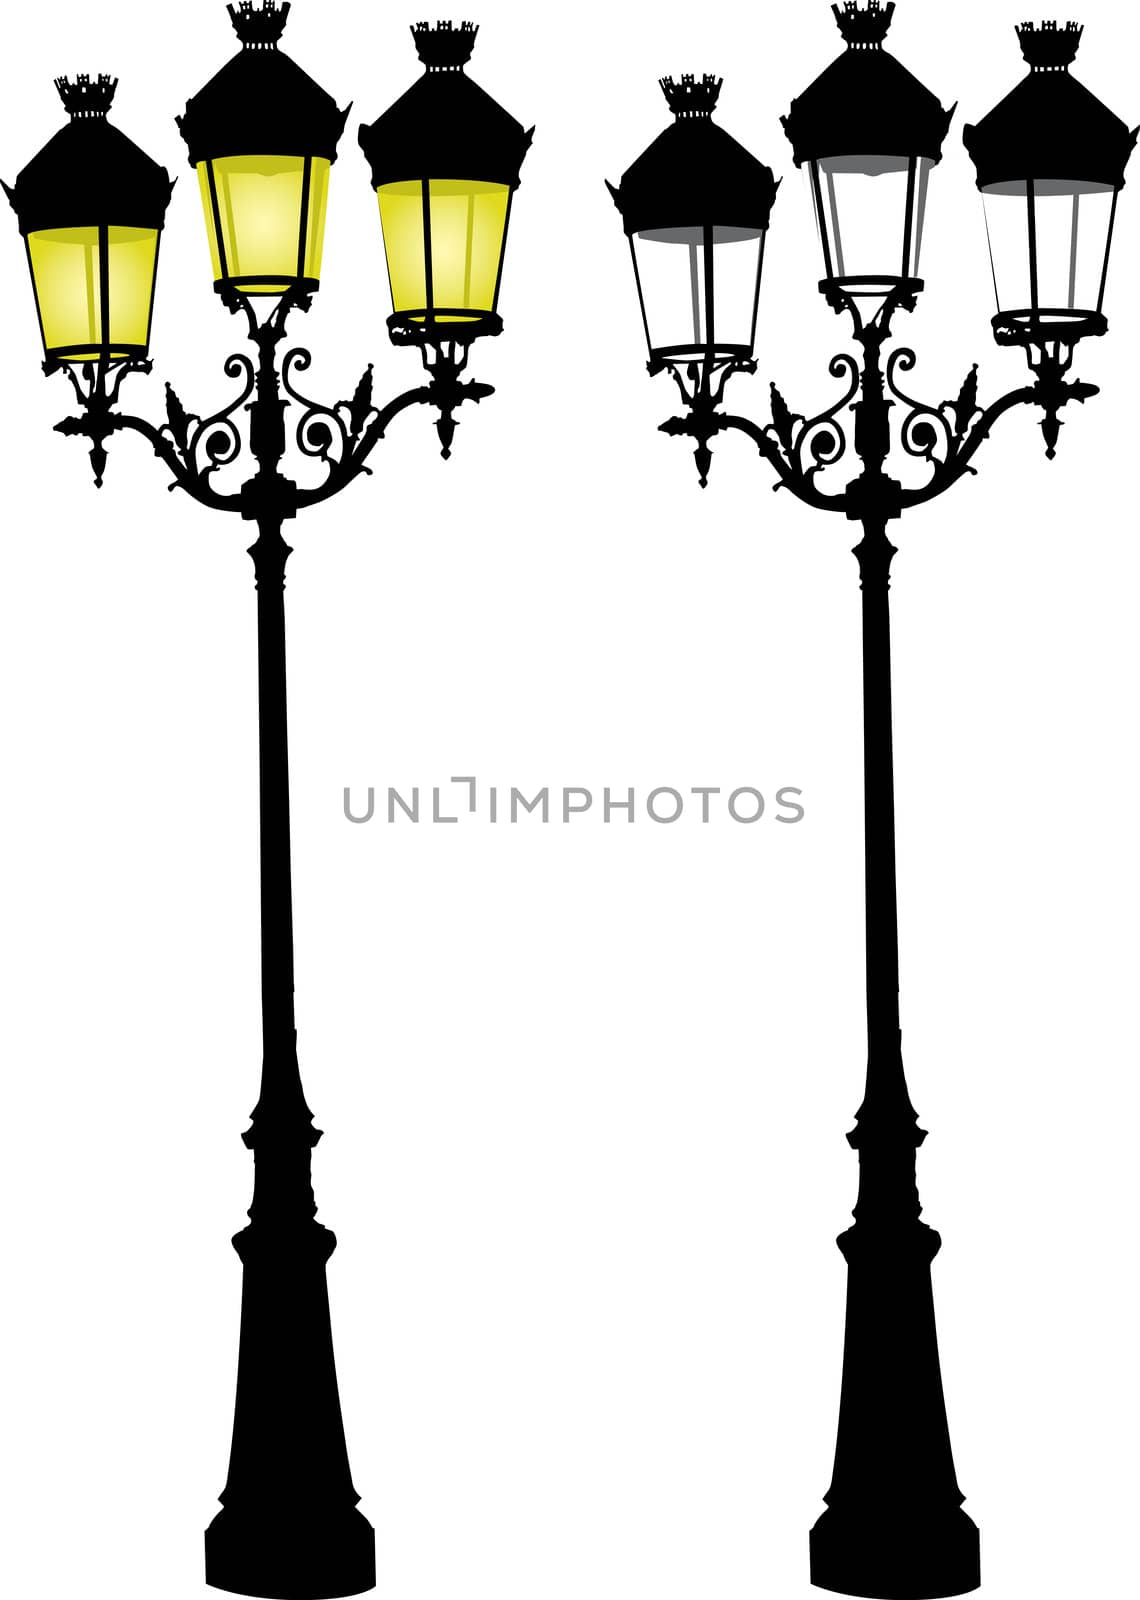 Retro street lamp by ints